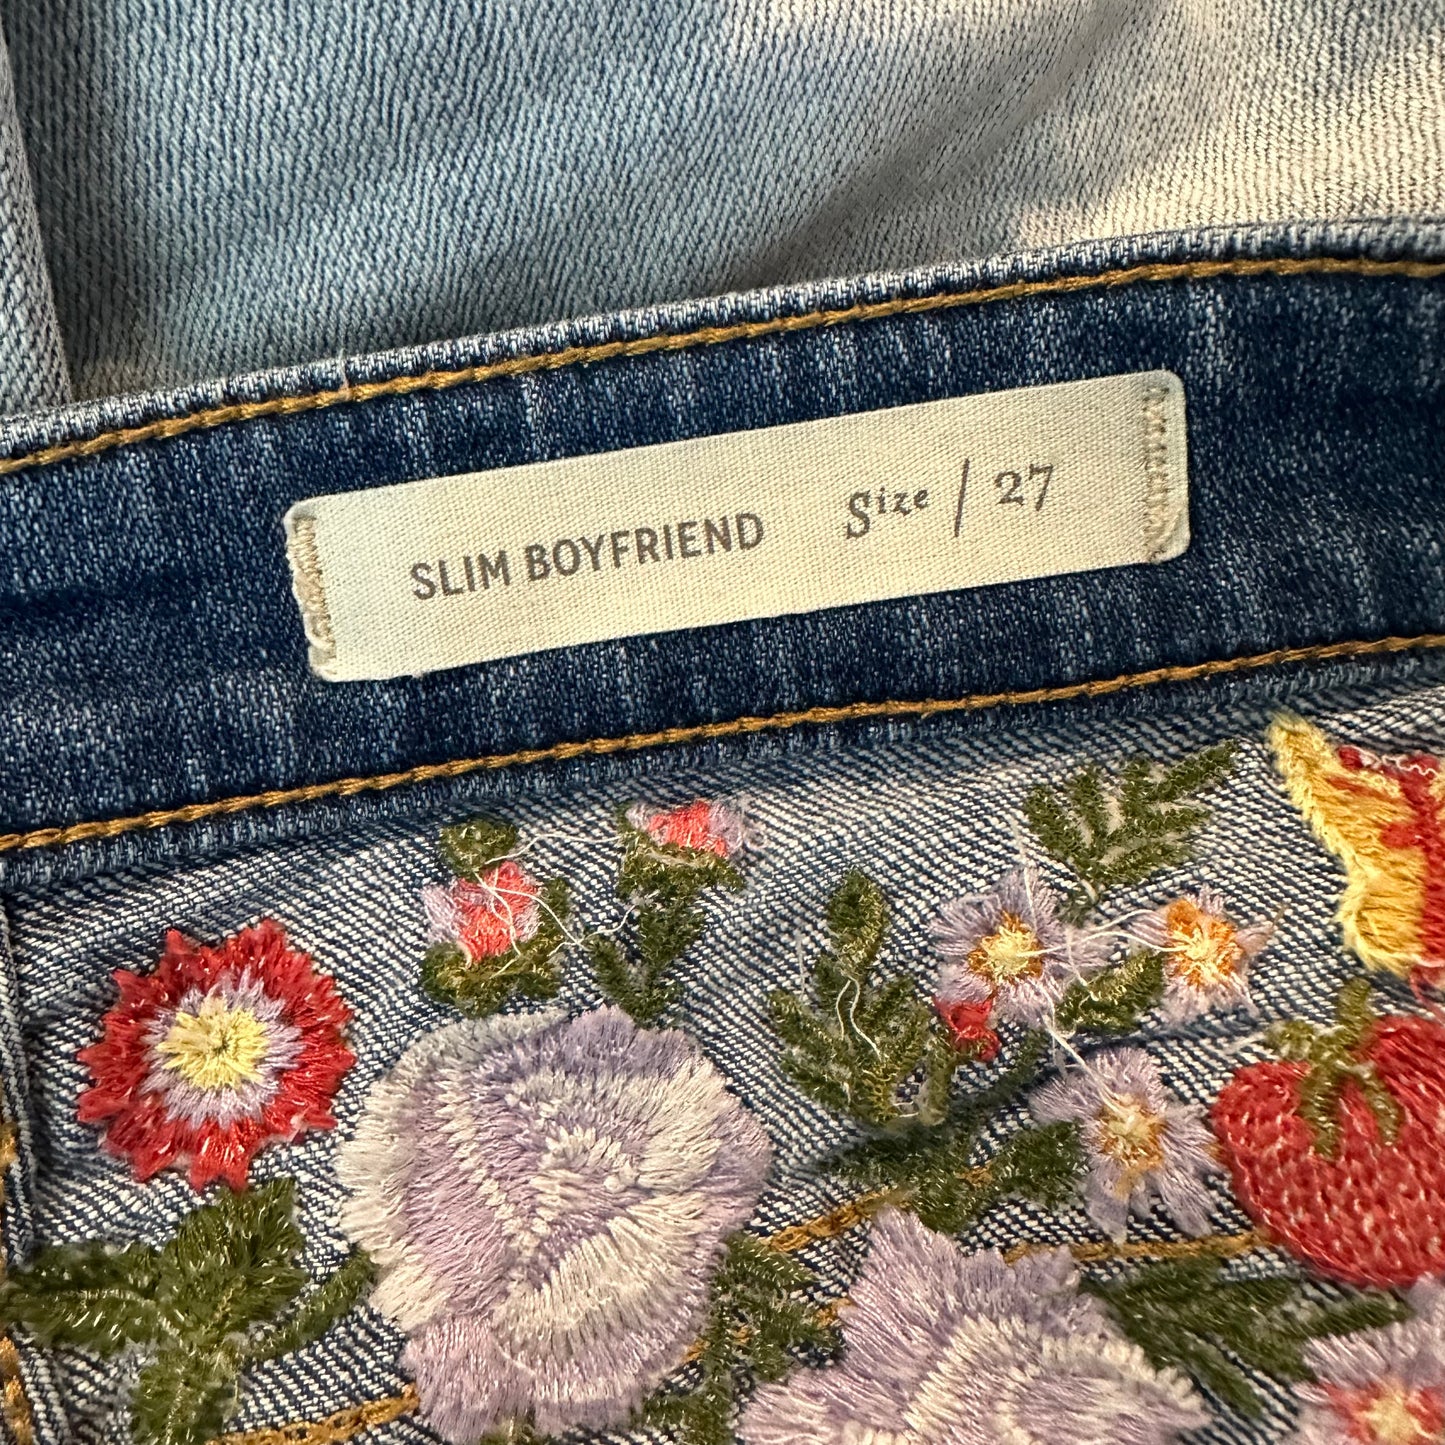 Anthropologie Pilcro and the Letterpress Slim Boyfriend Floral Fruit Embroidered Jean Shorts 27